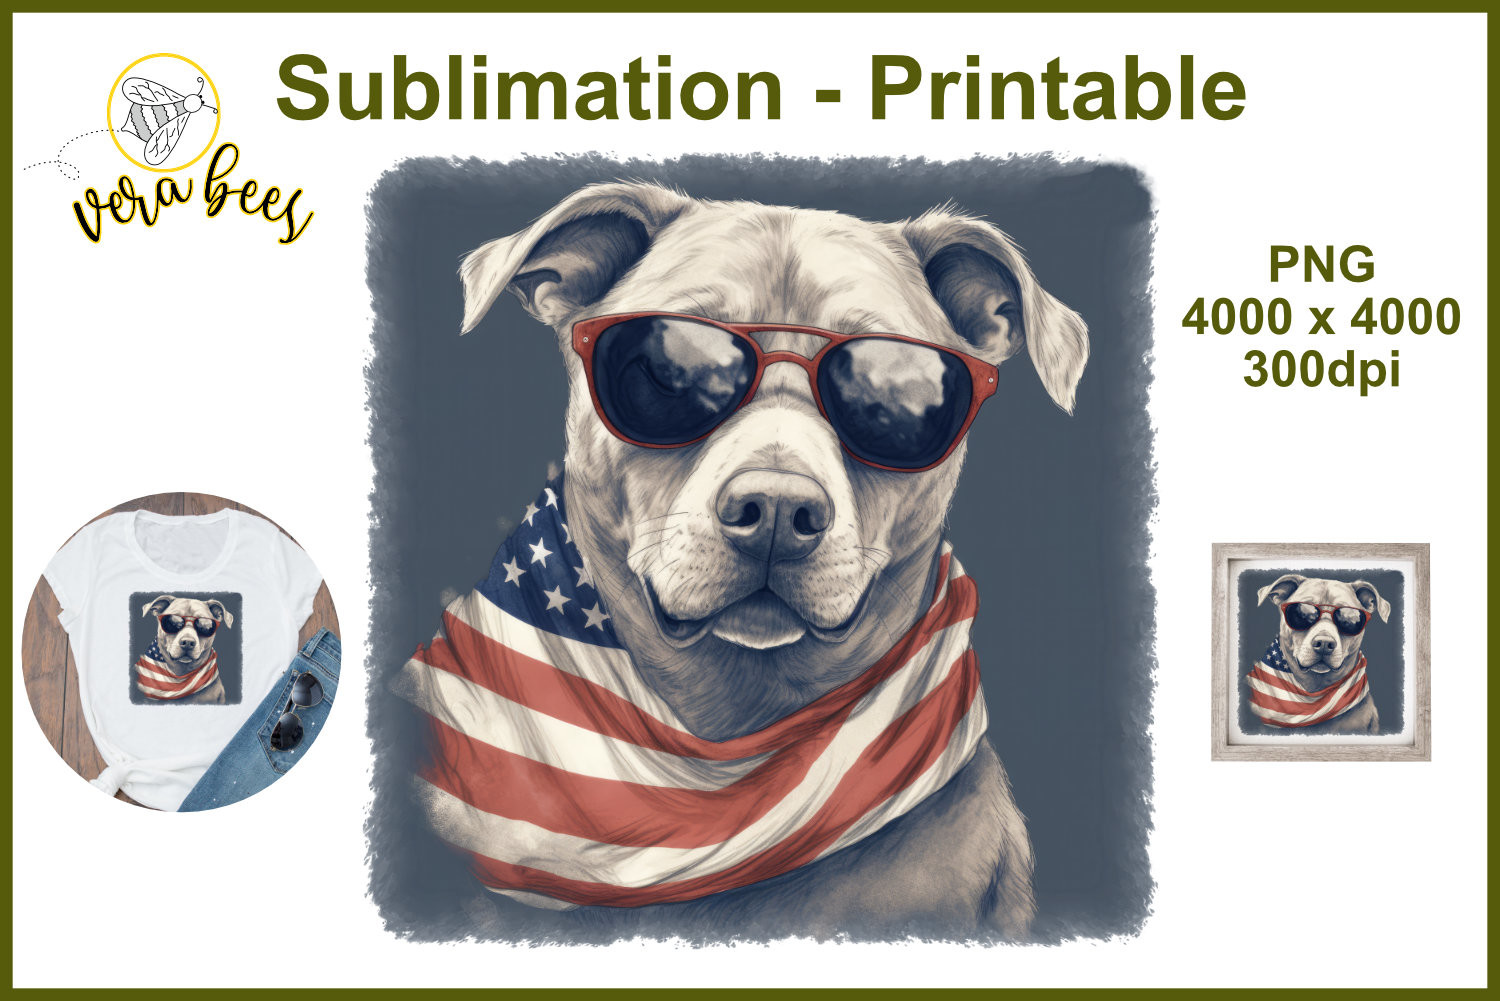 Patriotic Dog - USA - Sublimation Png Graphic by Vera Bees Svgs & More ...